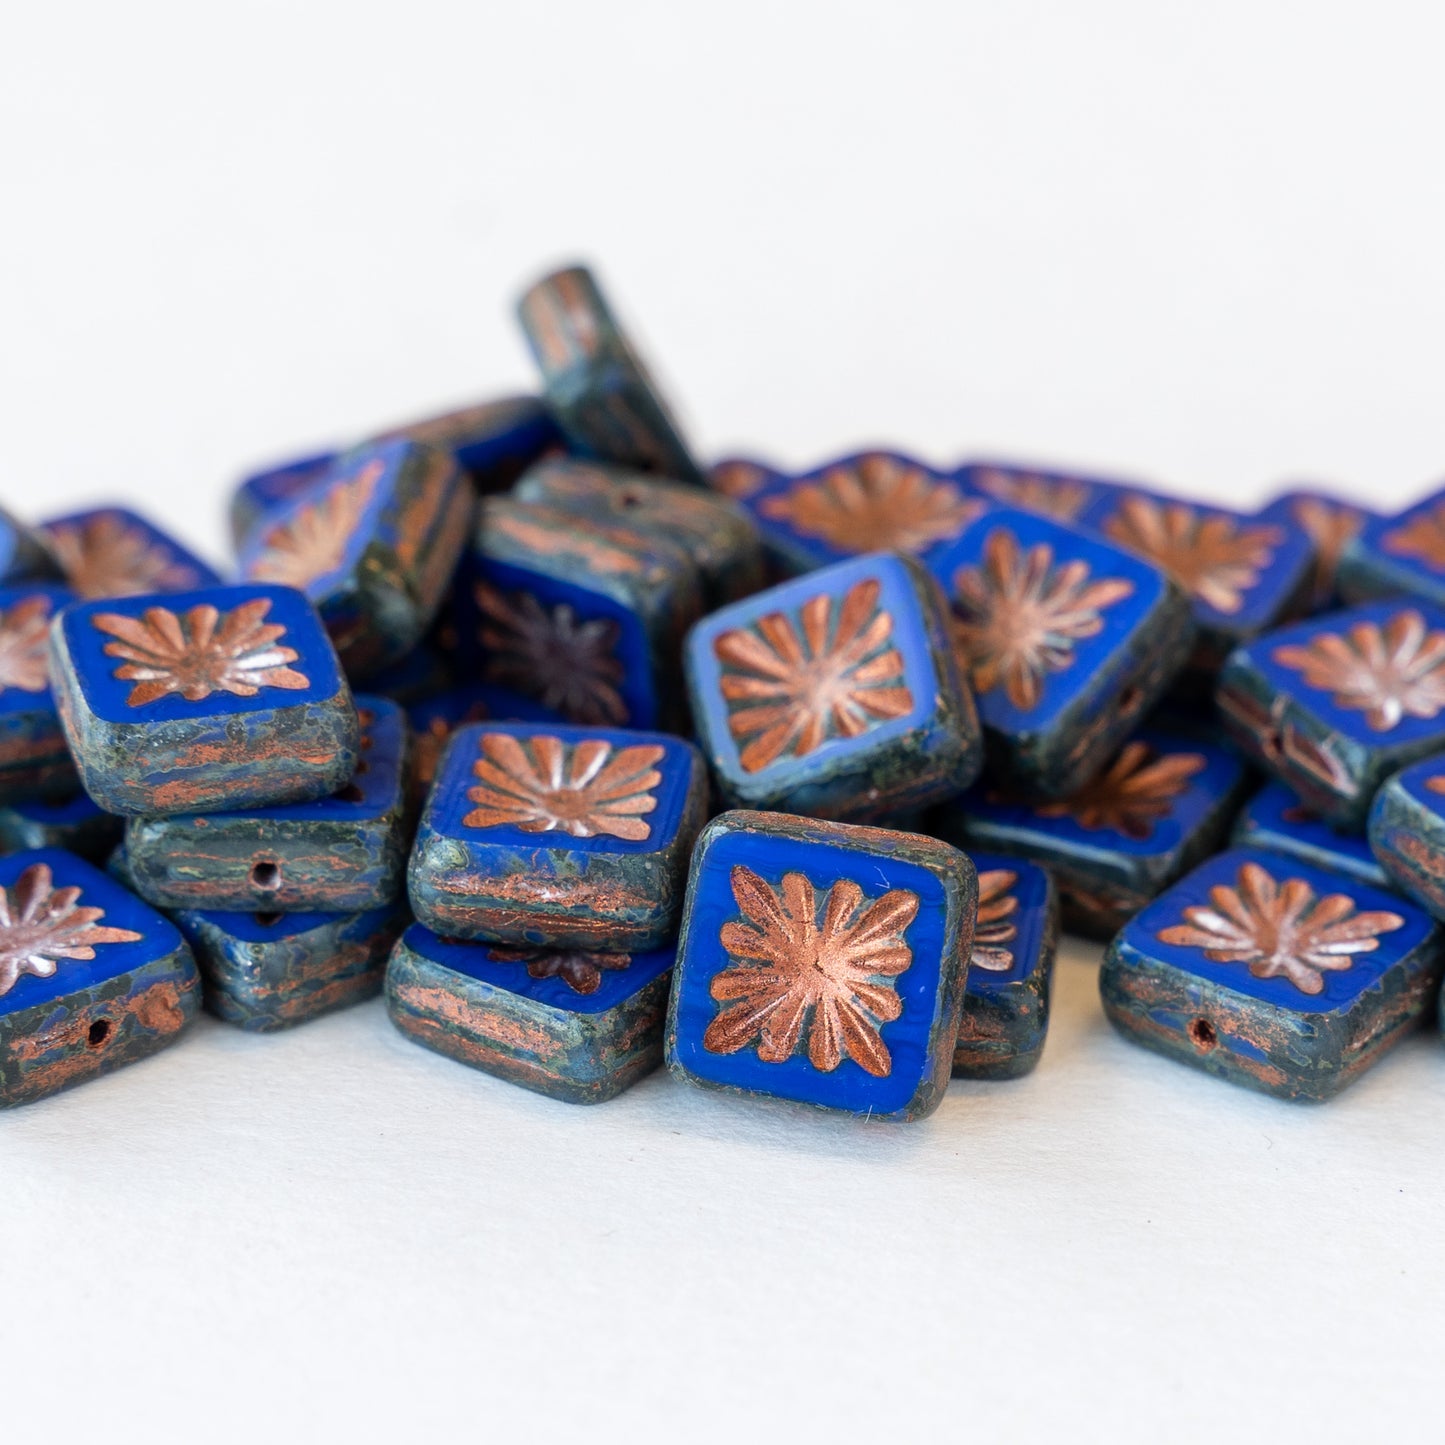 10mm Glass Tile Beads - Blue with Copper Wash - 10